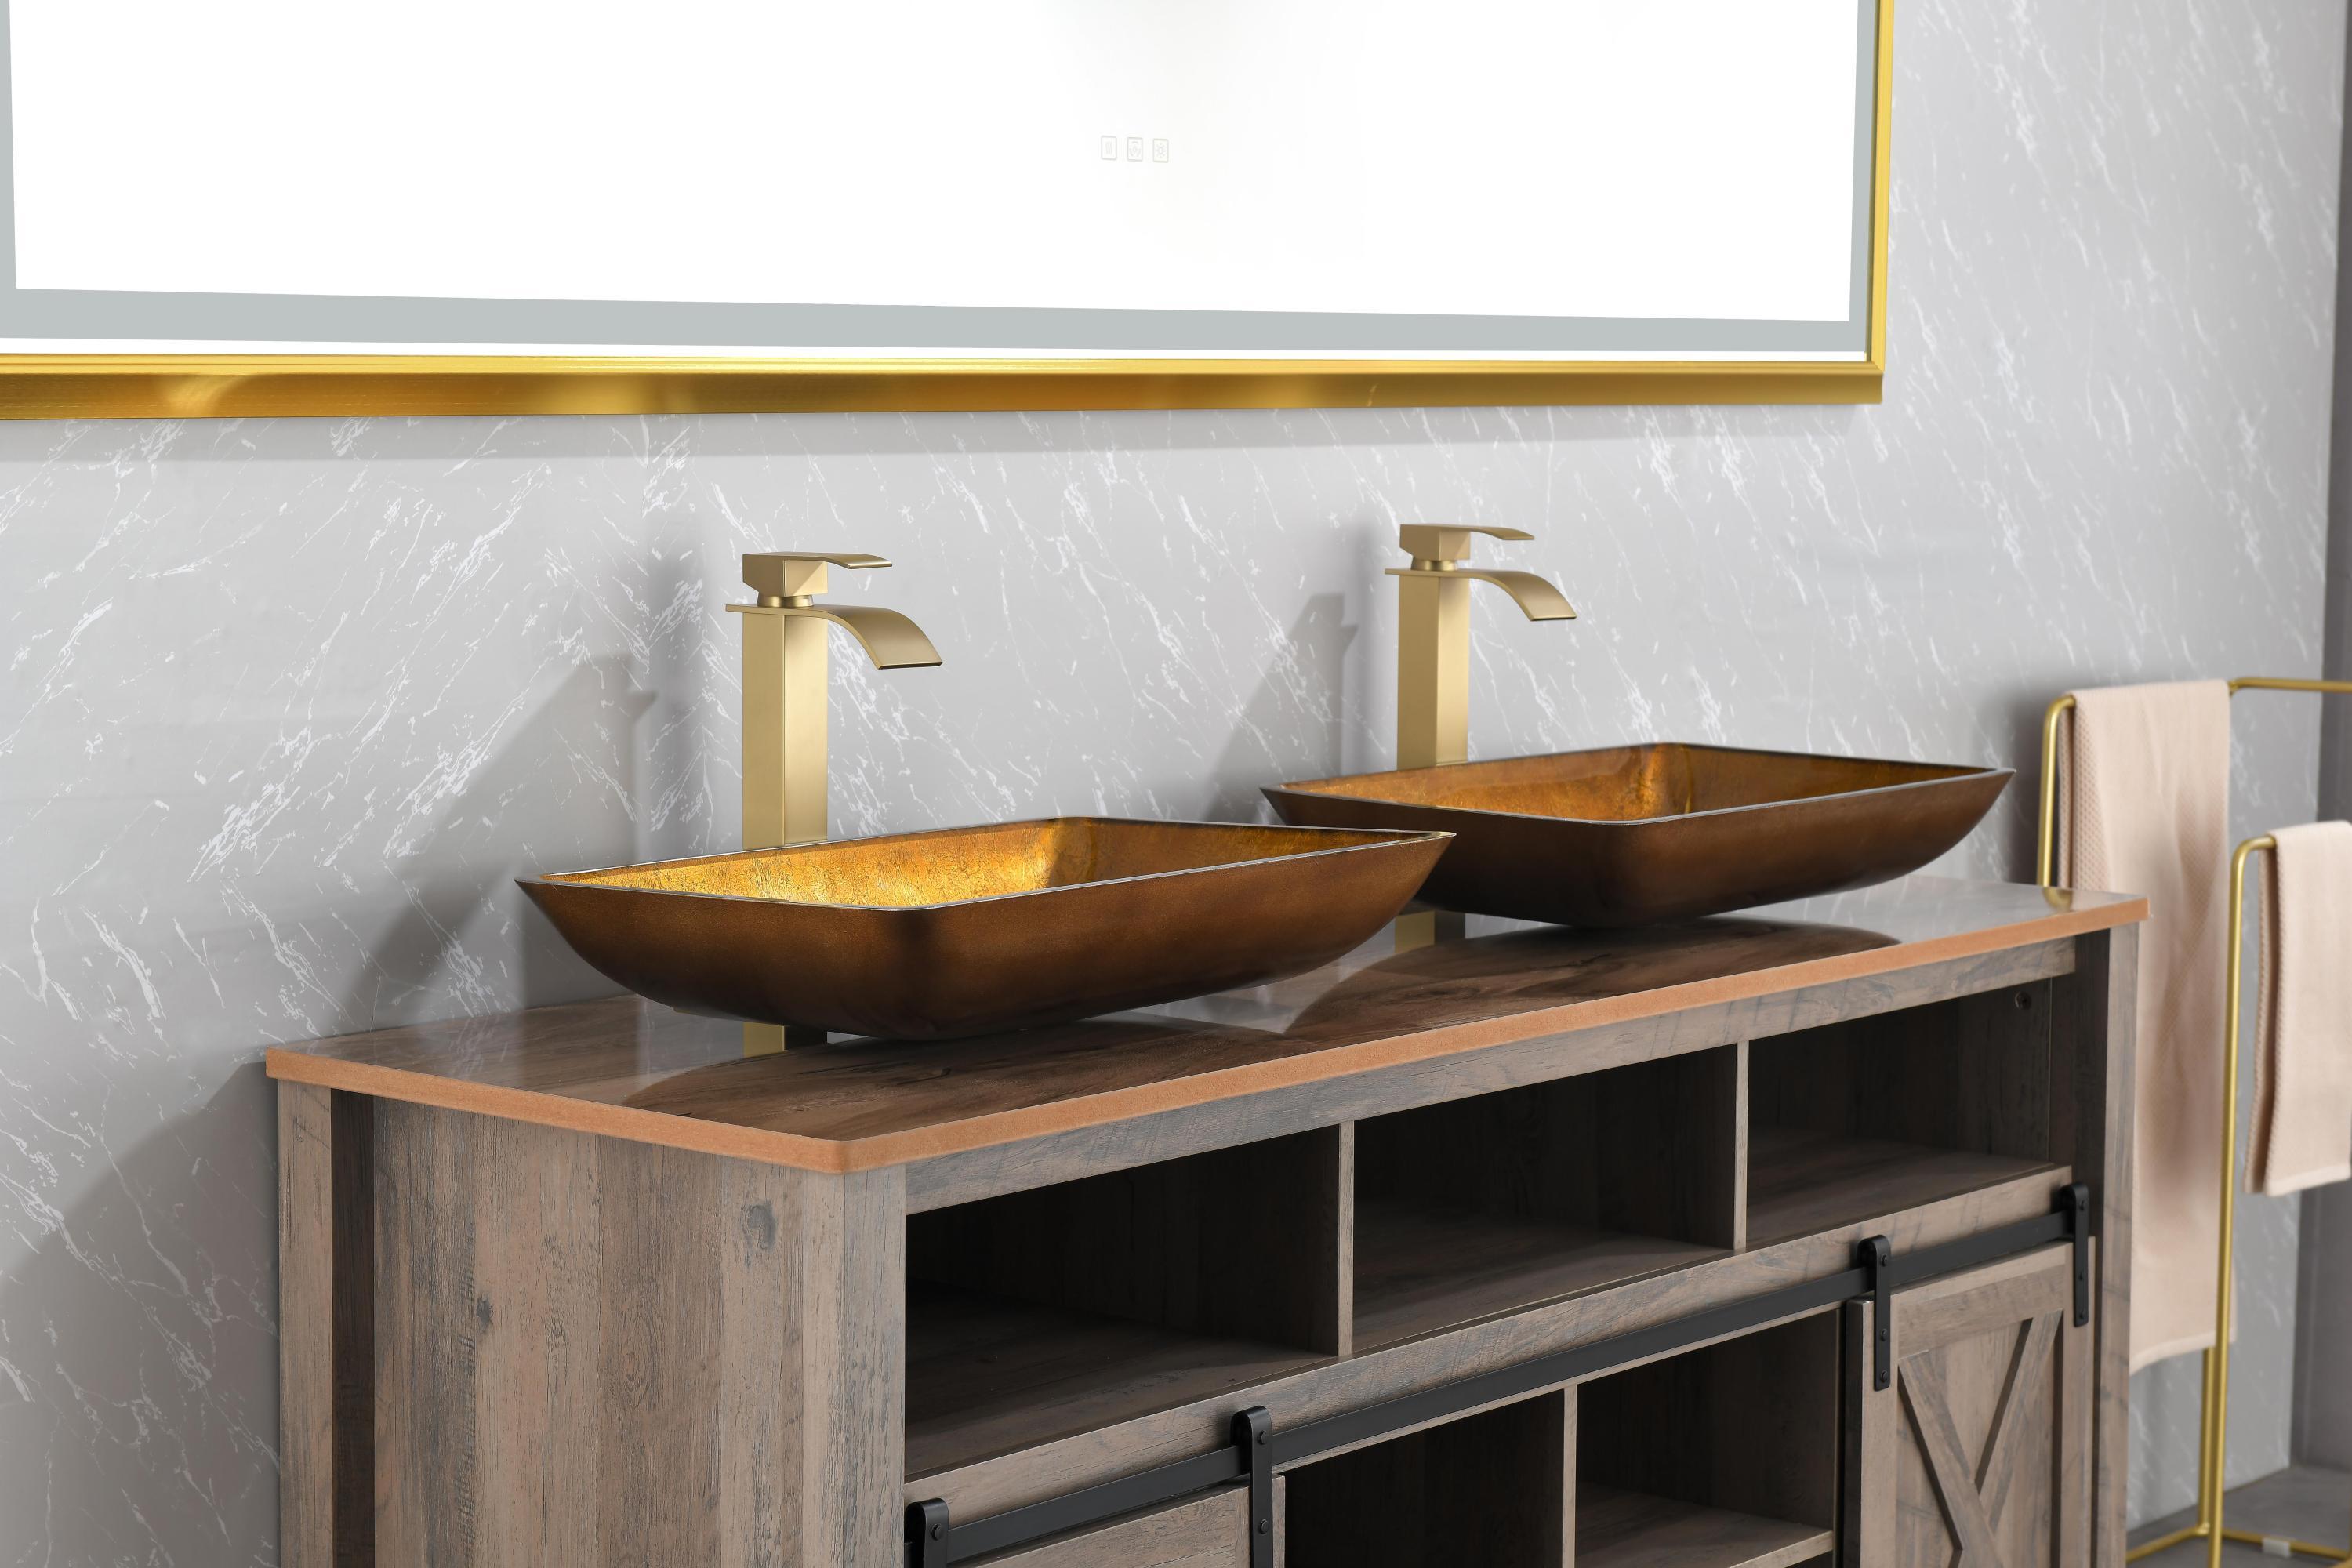 22.25" L -14.25" W -4 1/2" H Glass Rectangular Vessel Bathroom Sink Set with Gold Faucet and Gold Pop Up Drain